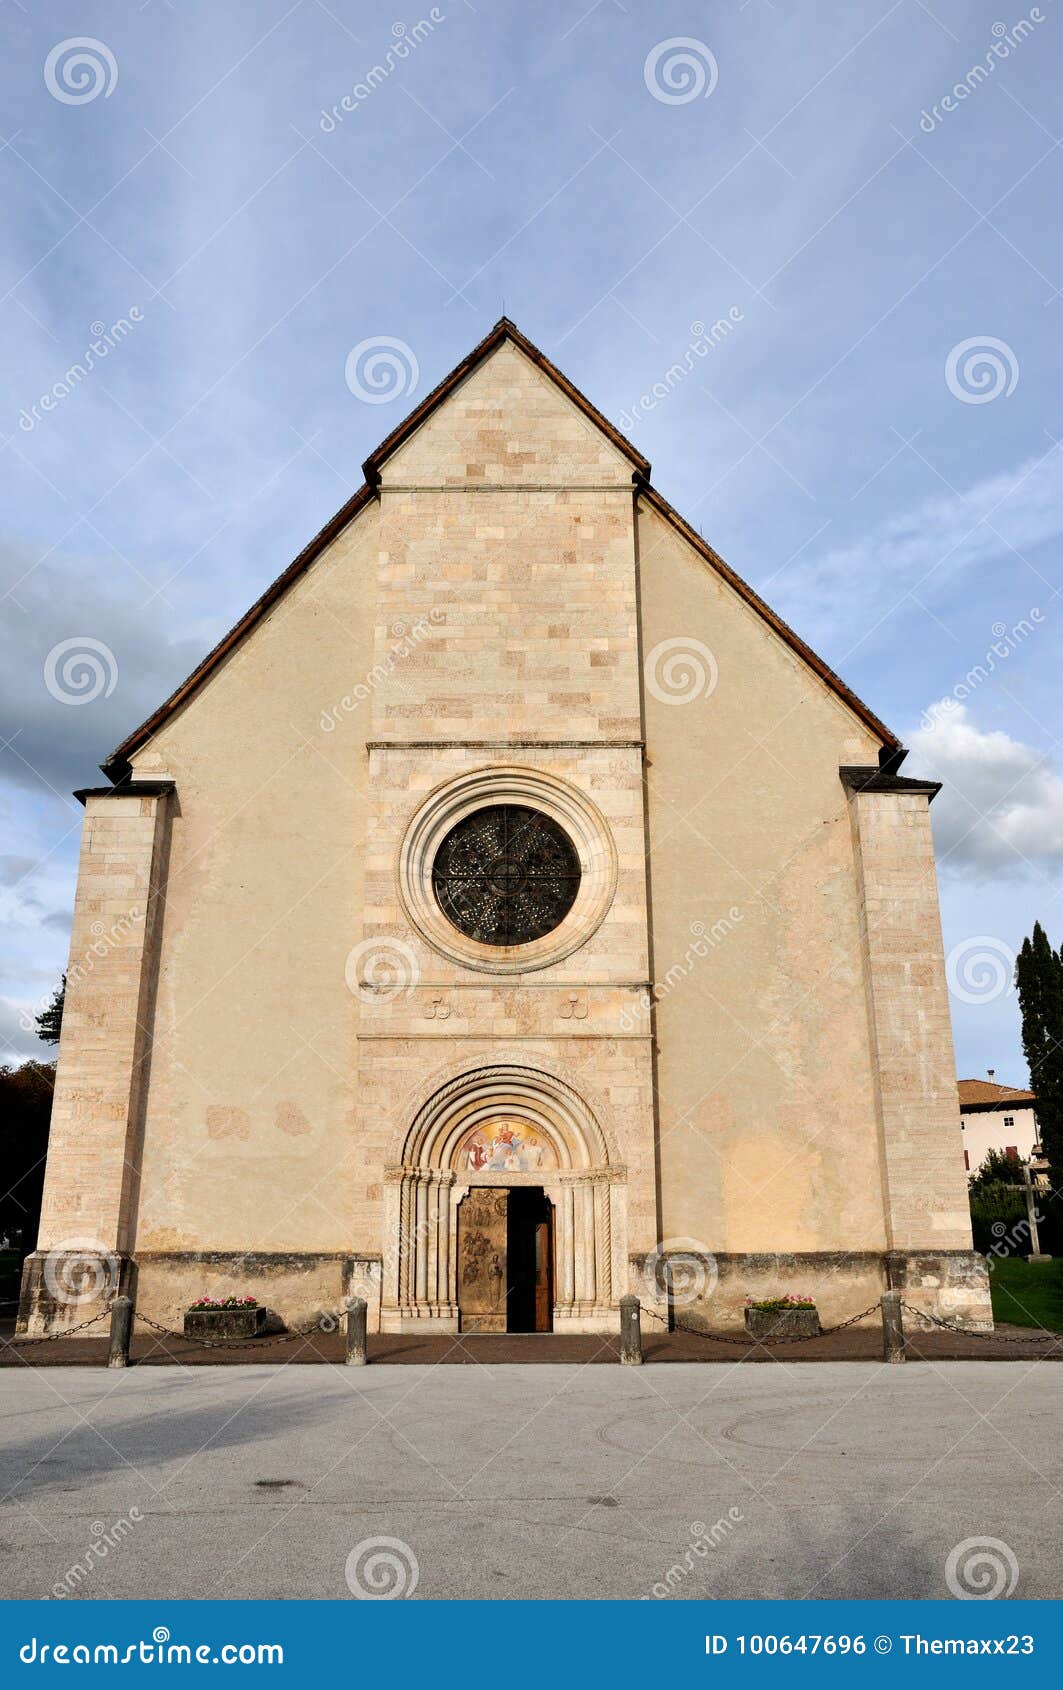 trentino church front view